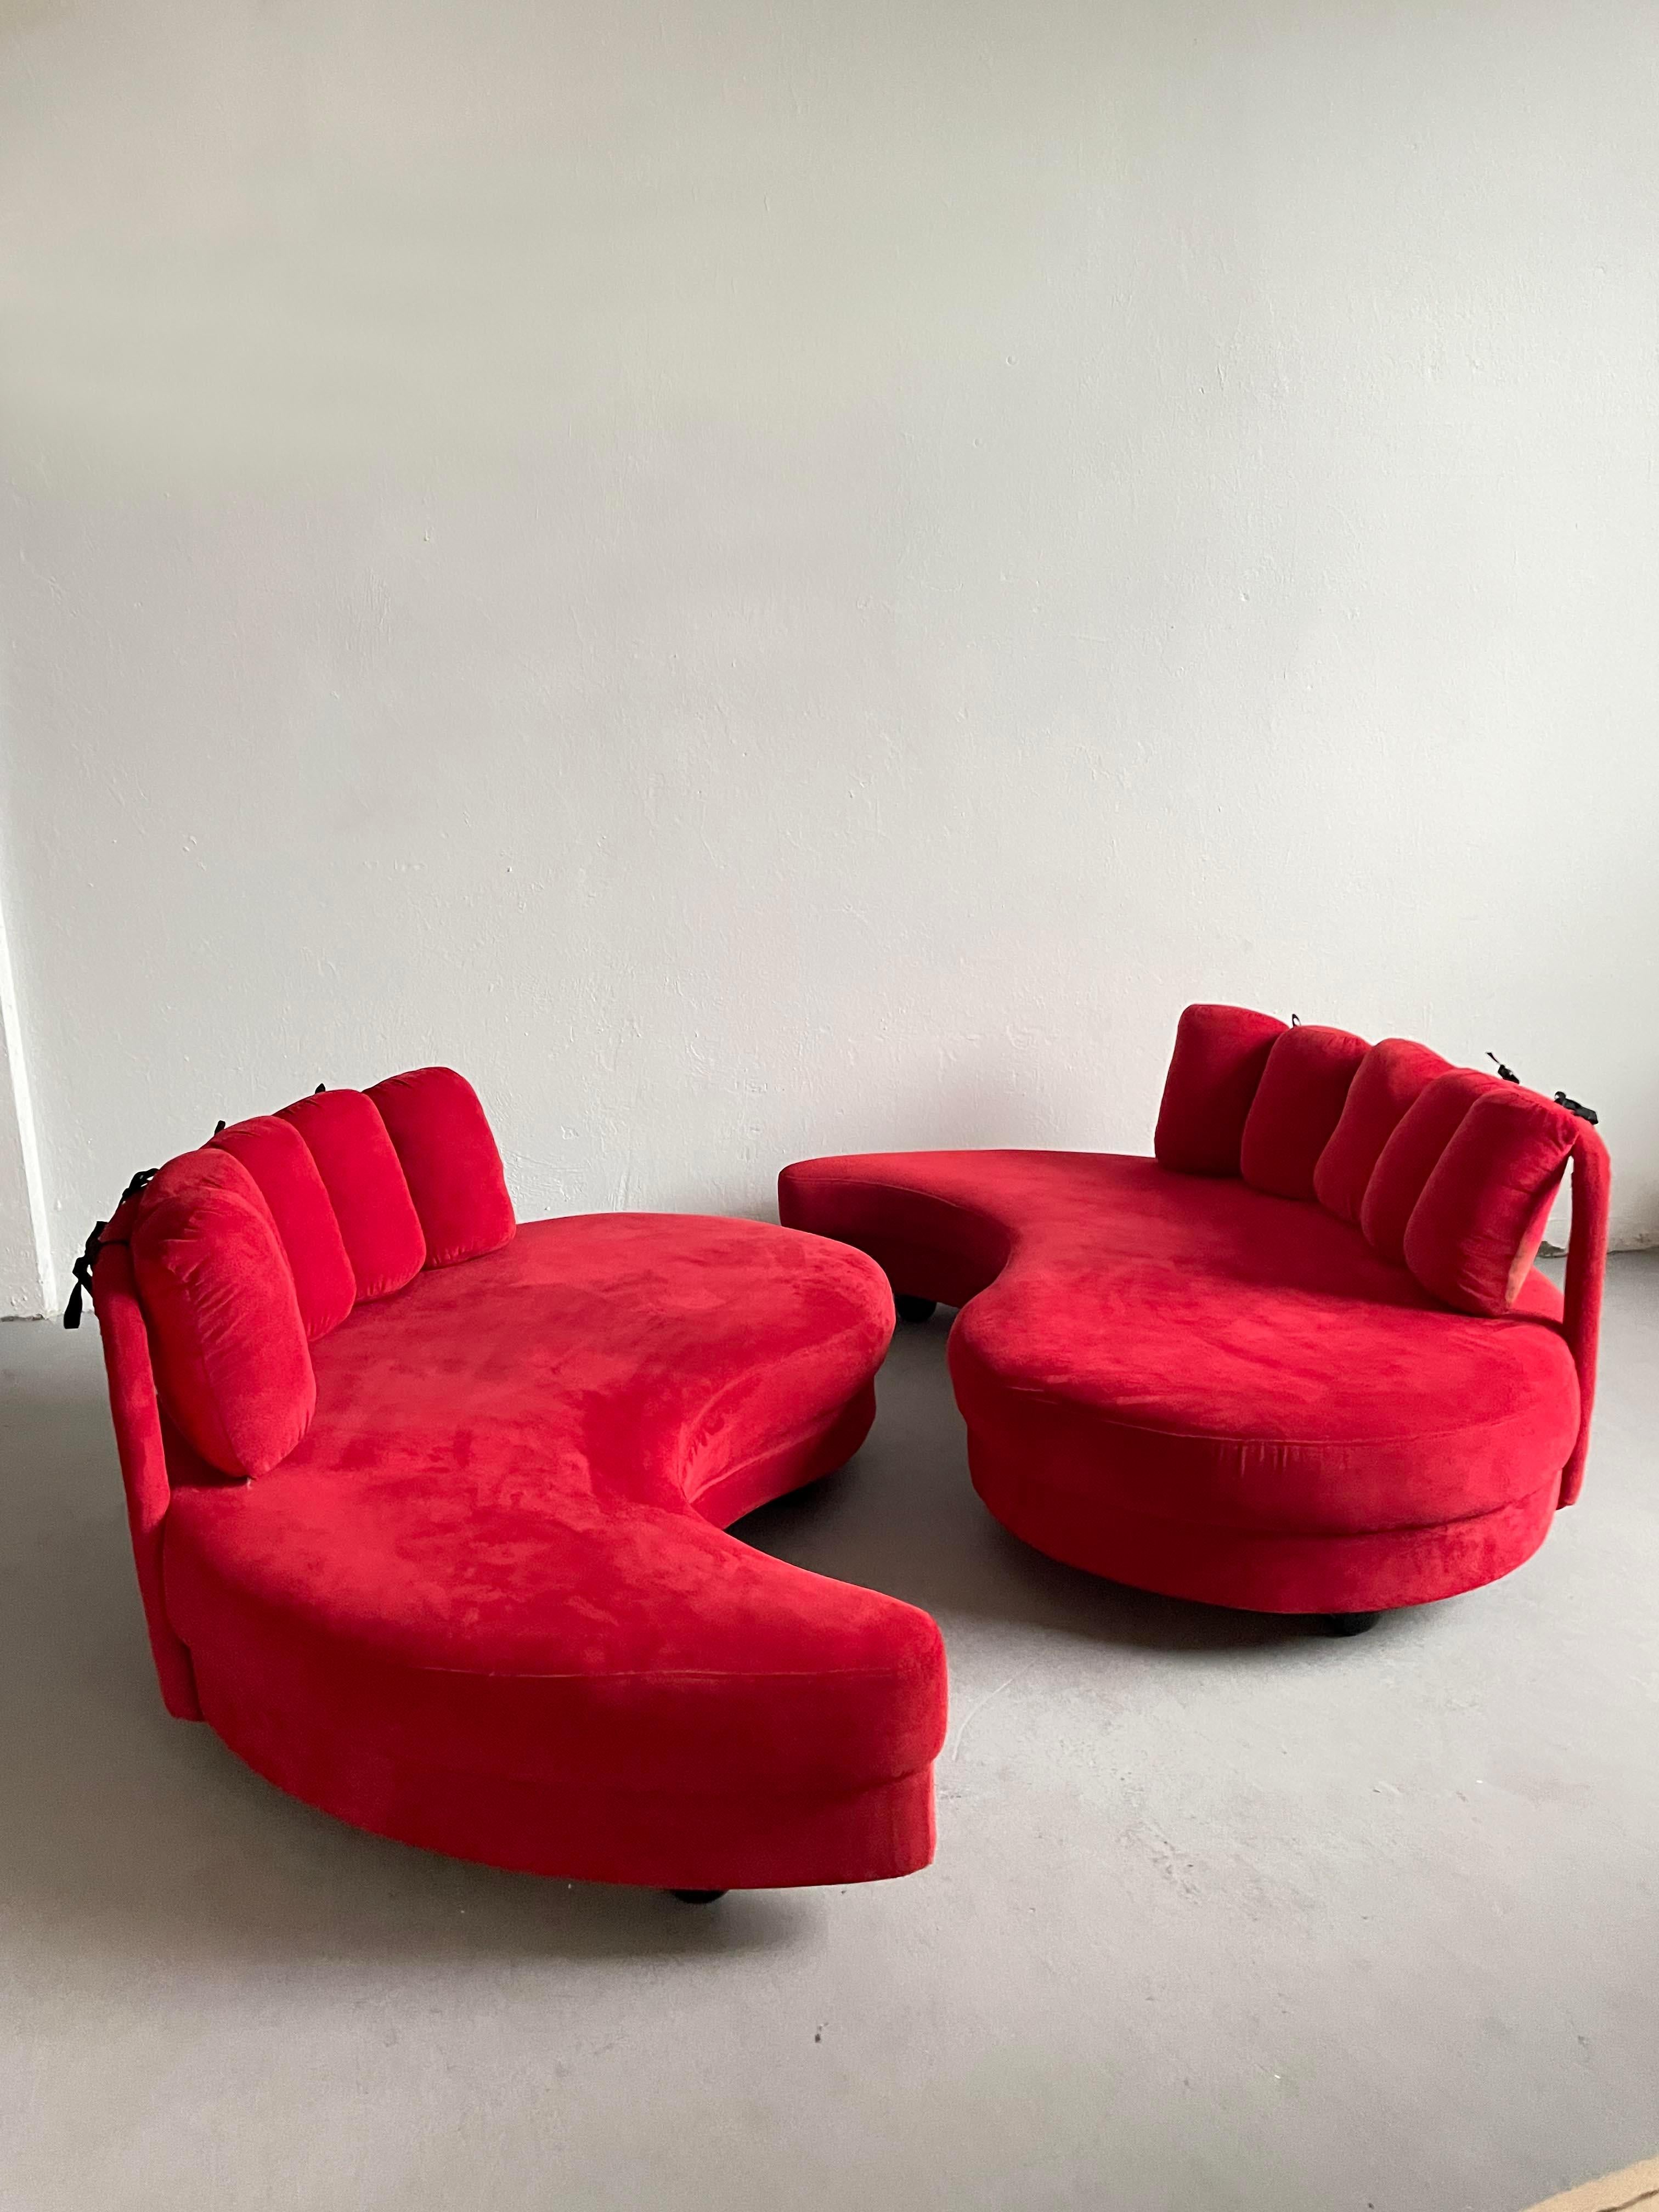 Set of 2 Postmodern Curved Yin-Yang Shaped Sofa Daybeds in Red Fabric, c 1980s In Good Condition For Sale In Zagreb, HR